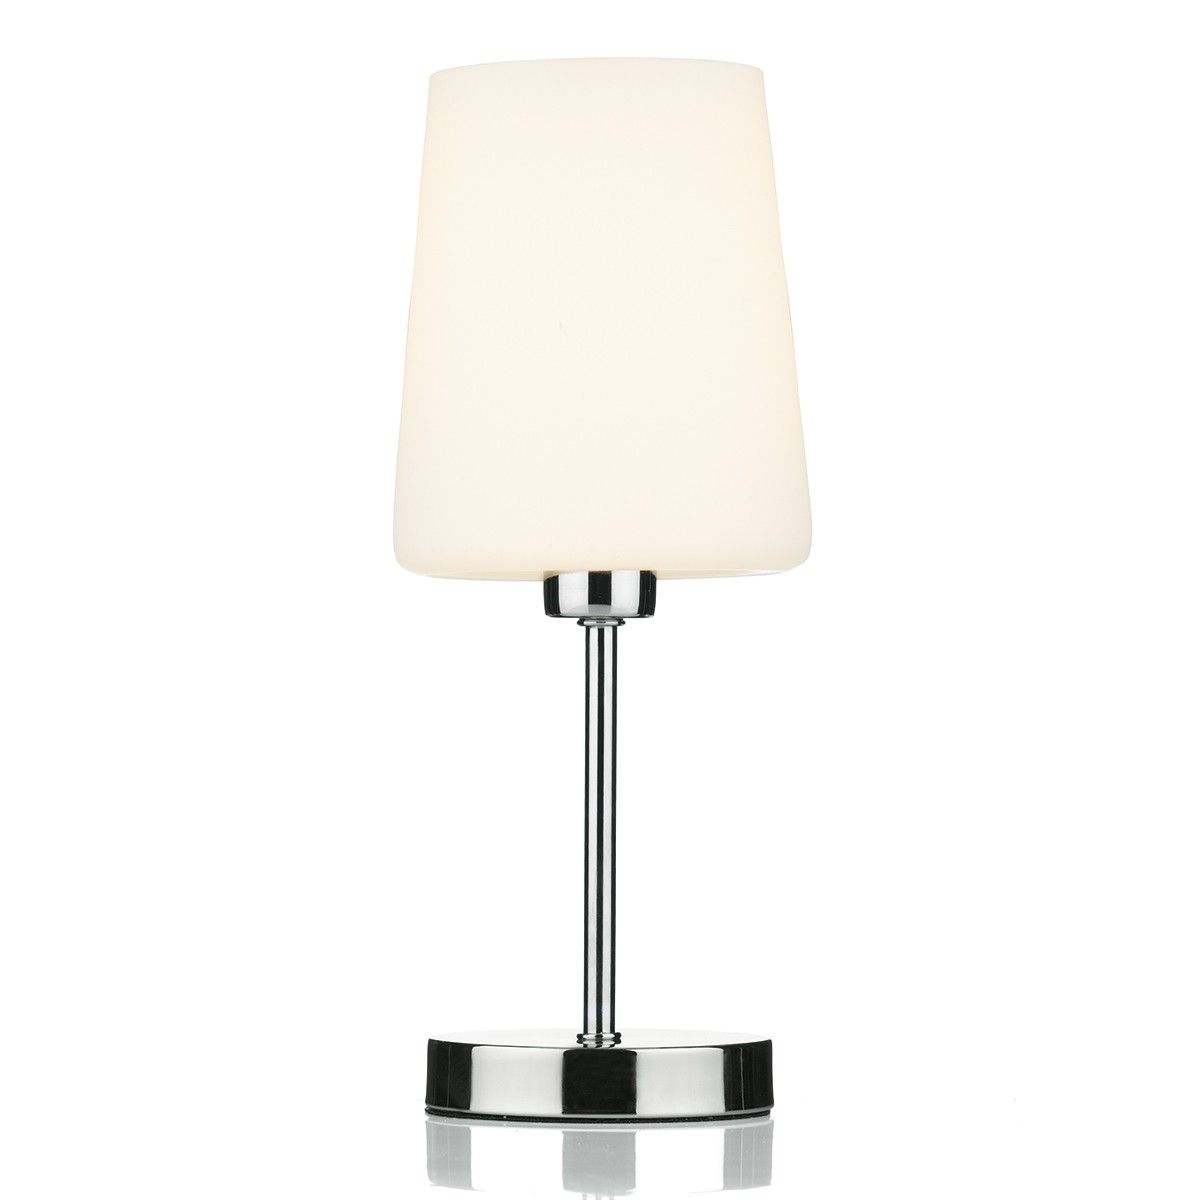 Lamp : Touch Table Lamps Bedroom Exciting For Living Room John Lewis Pertaining To Well Known Living Room Touch Table Lamps (View 4 of 15)